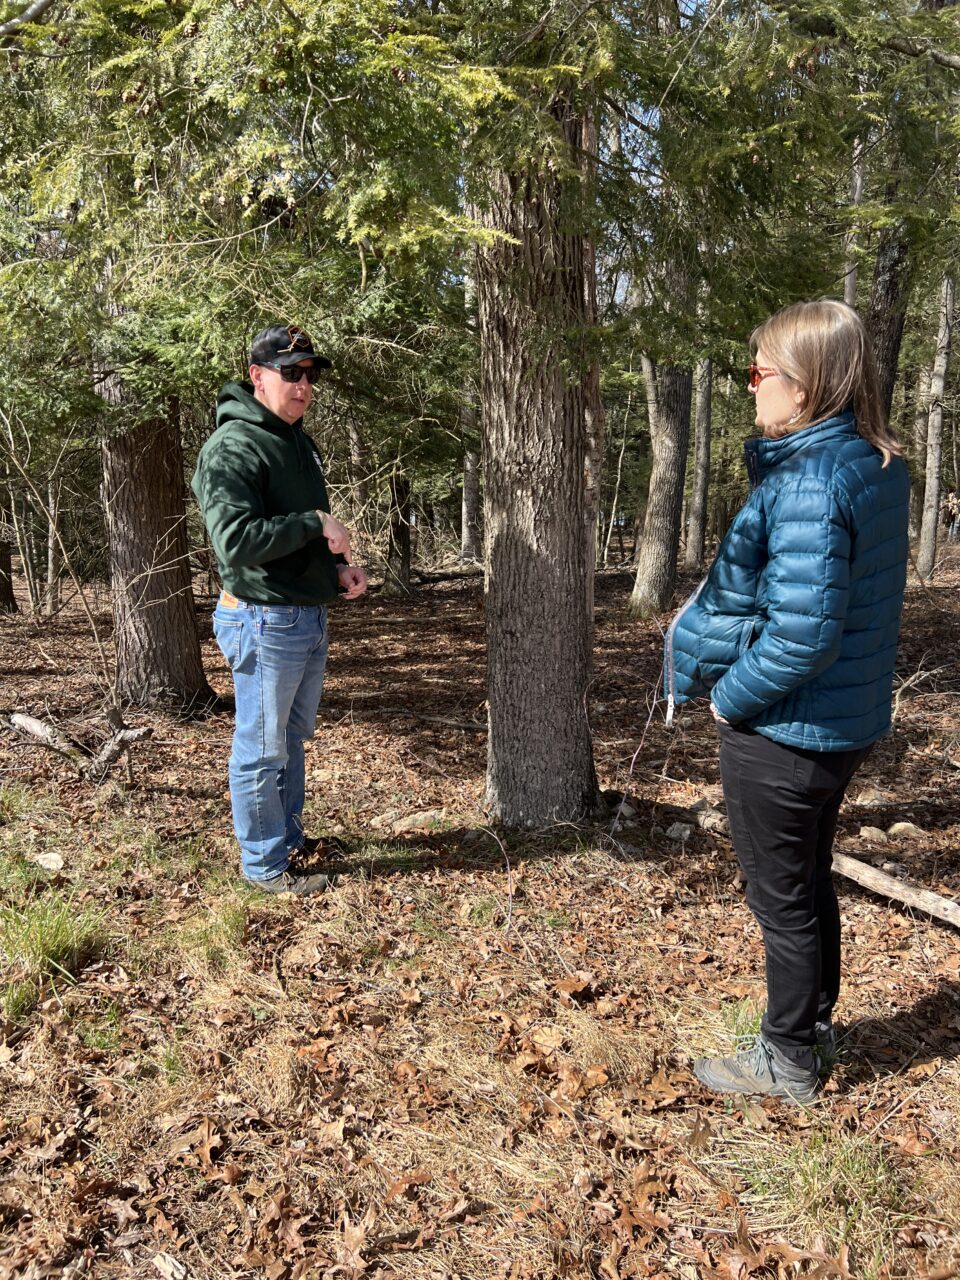 Jim Altemus, a forest health program specialist with Pennsylvania’s Department of Conservation and Natural Resources, left, and Meredith Seltzer, a DCNR forest program specialist, in Bald Eagle State Park.